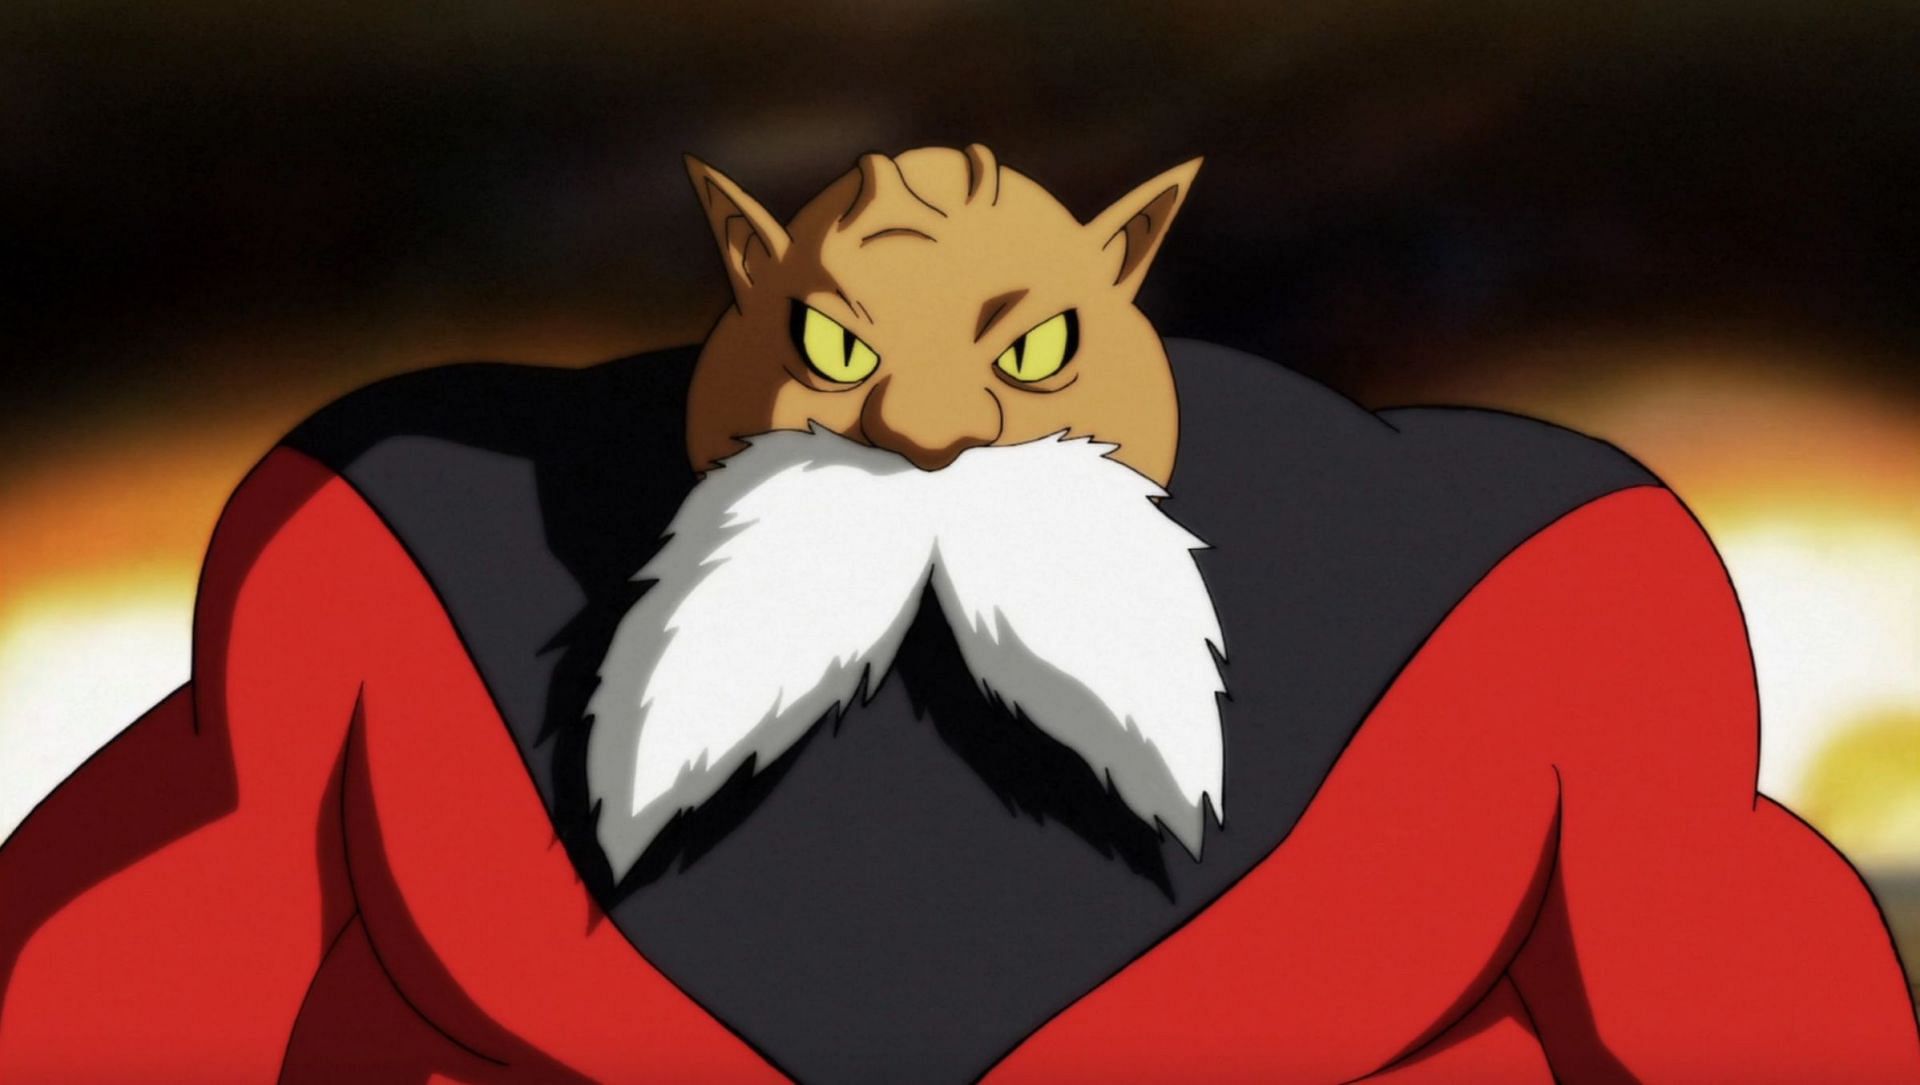 Toppo from the anime (image via Toei Animation)